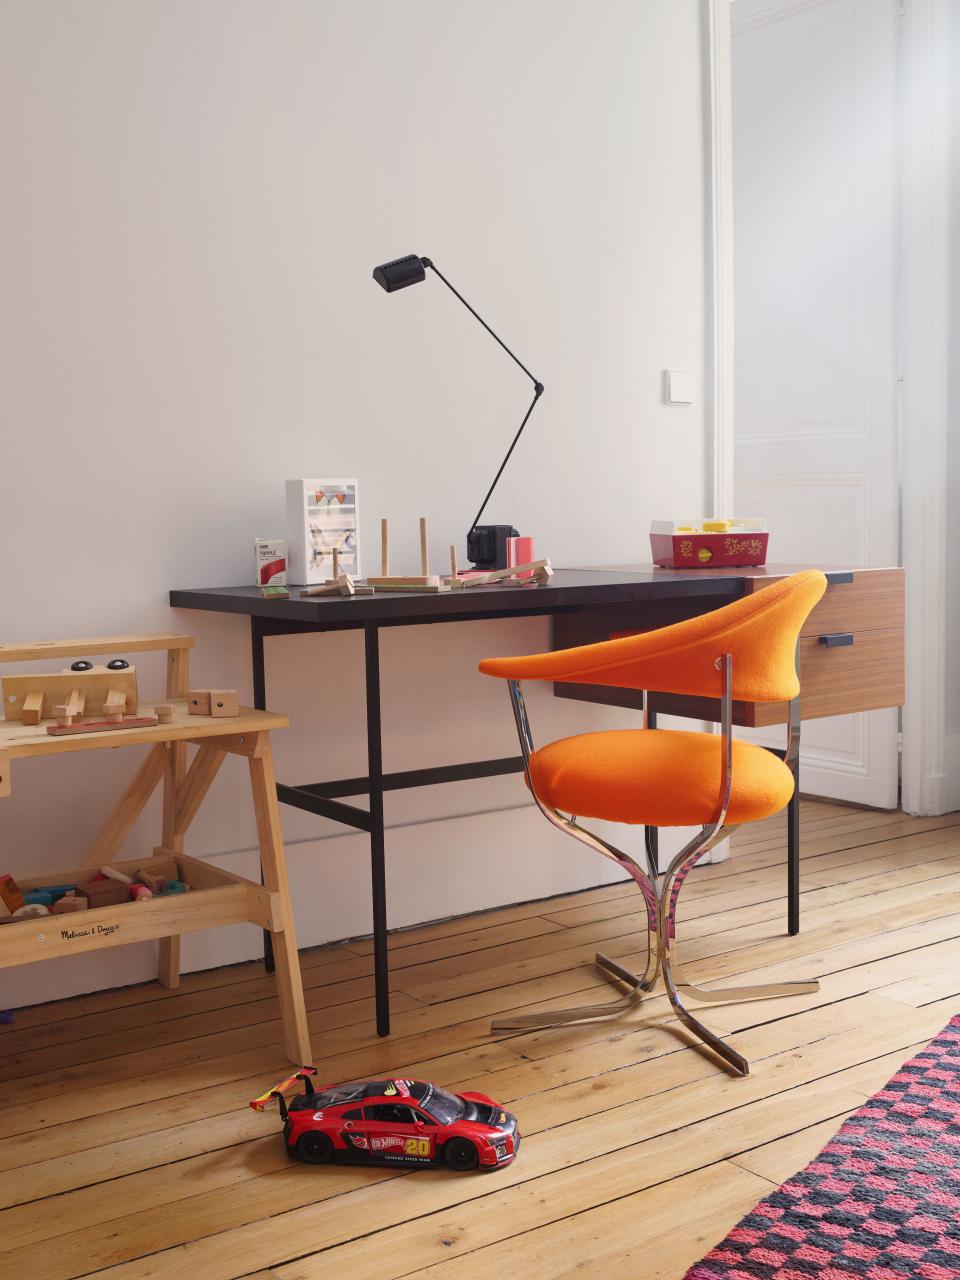 Paulin's Thonet desk with a Paulin, Paulin, Paulin F050 chair, which was designed for Artifort in 1959 but is only now being produced for the first time.